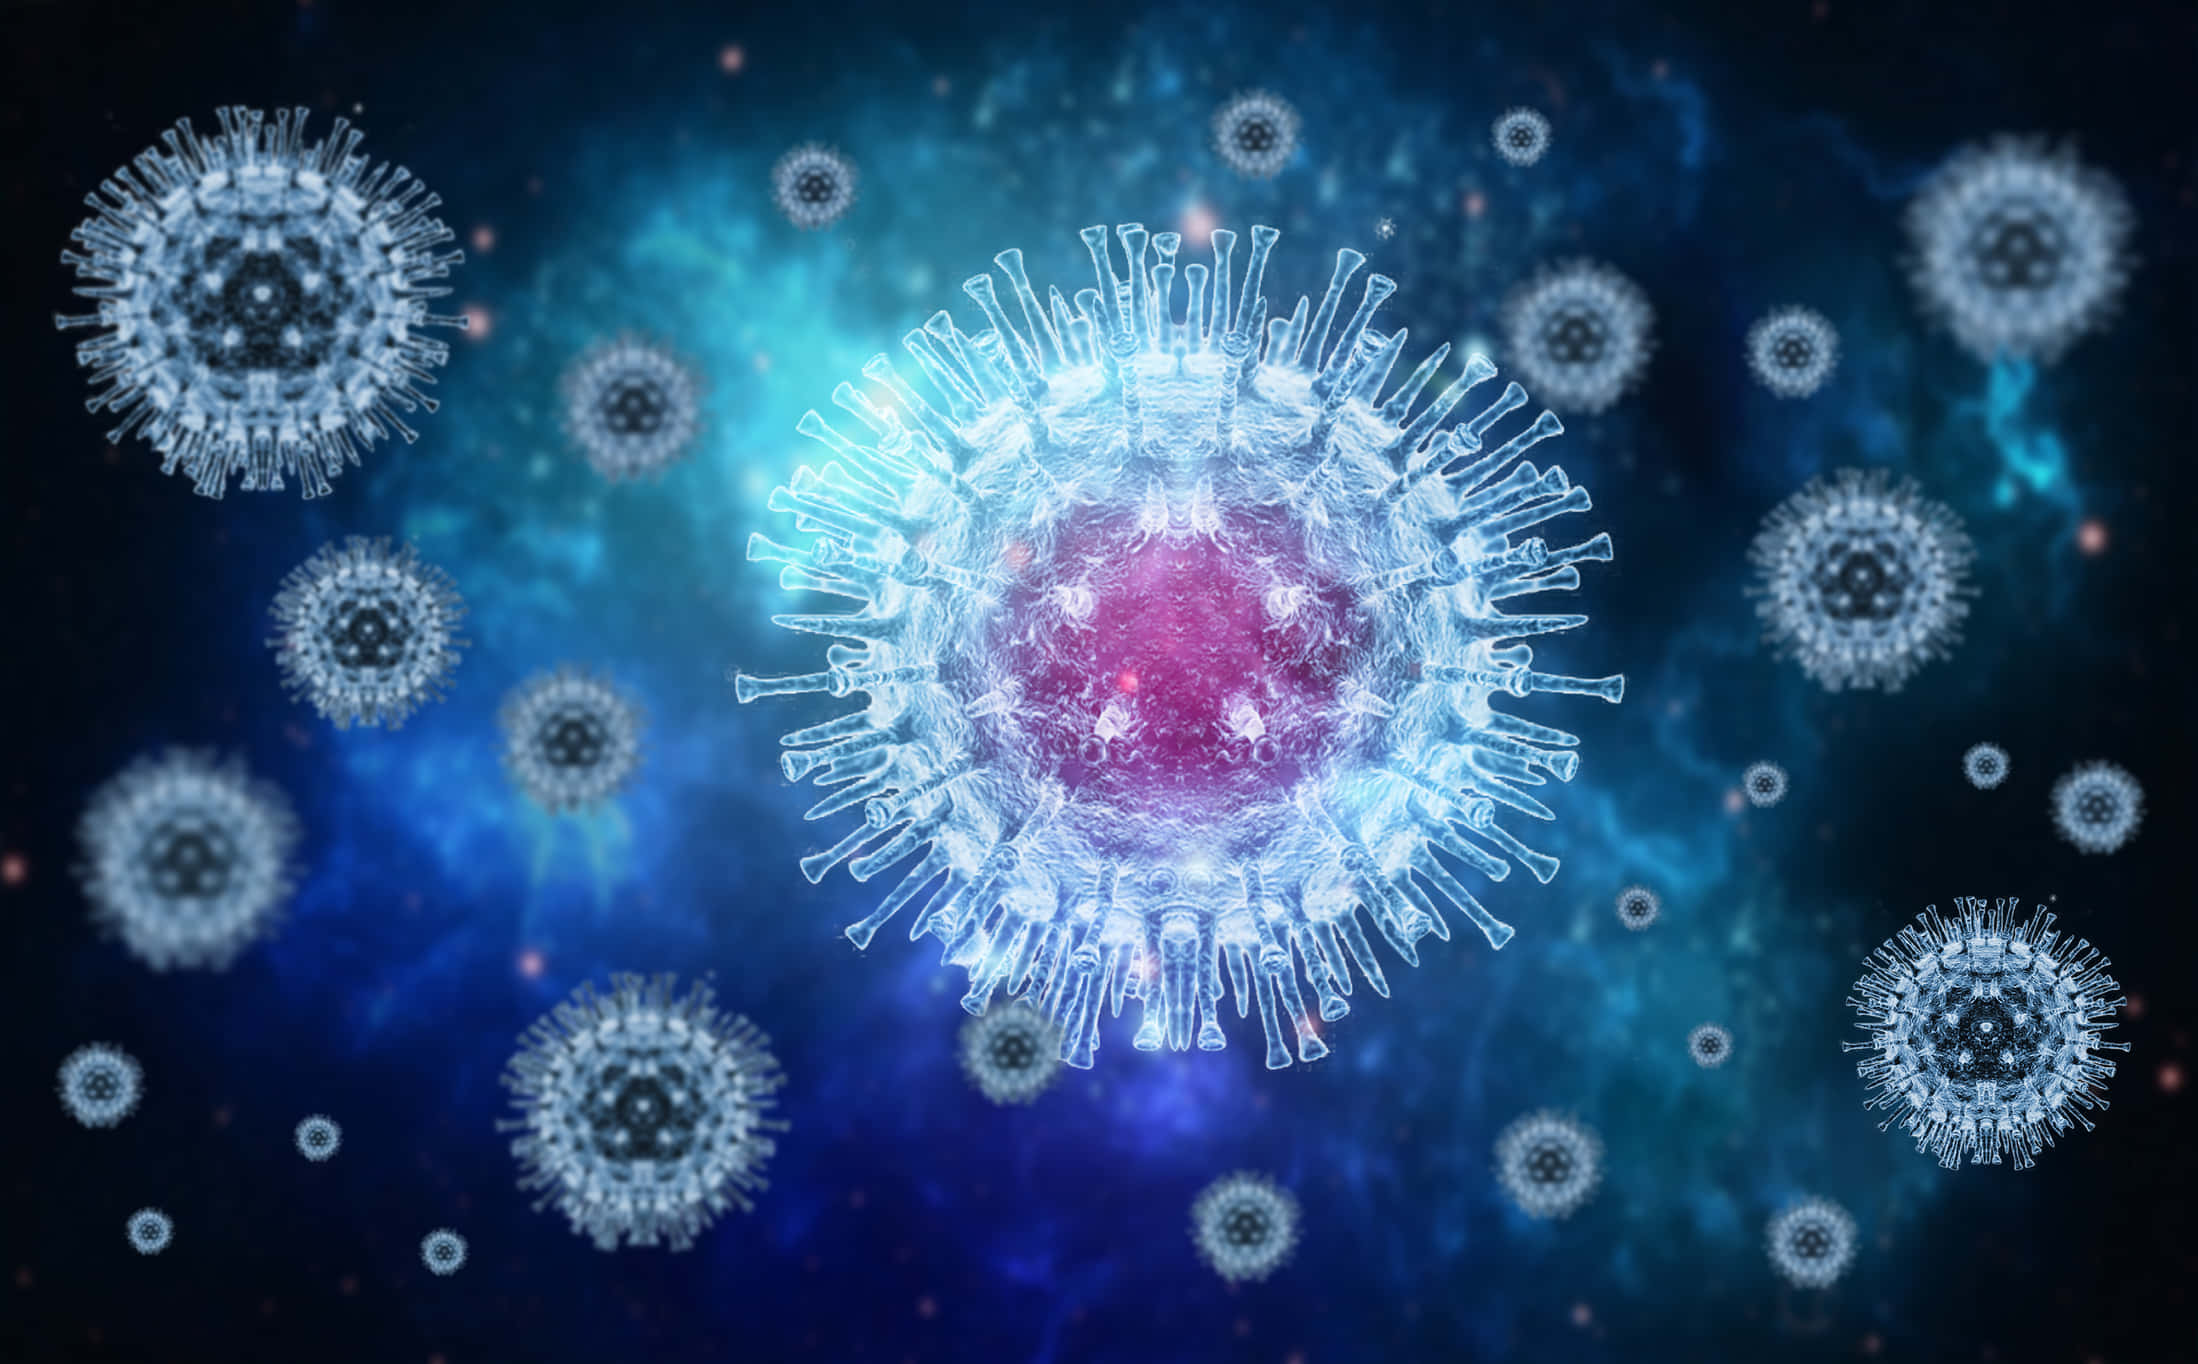 Illustration Of An Eligible Viral Infection Wallpaper